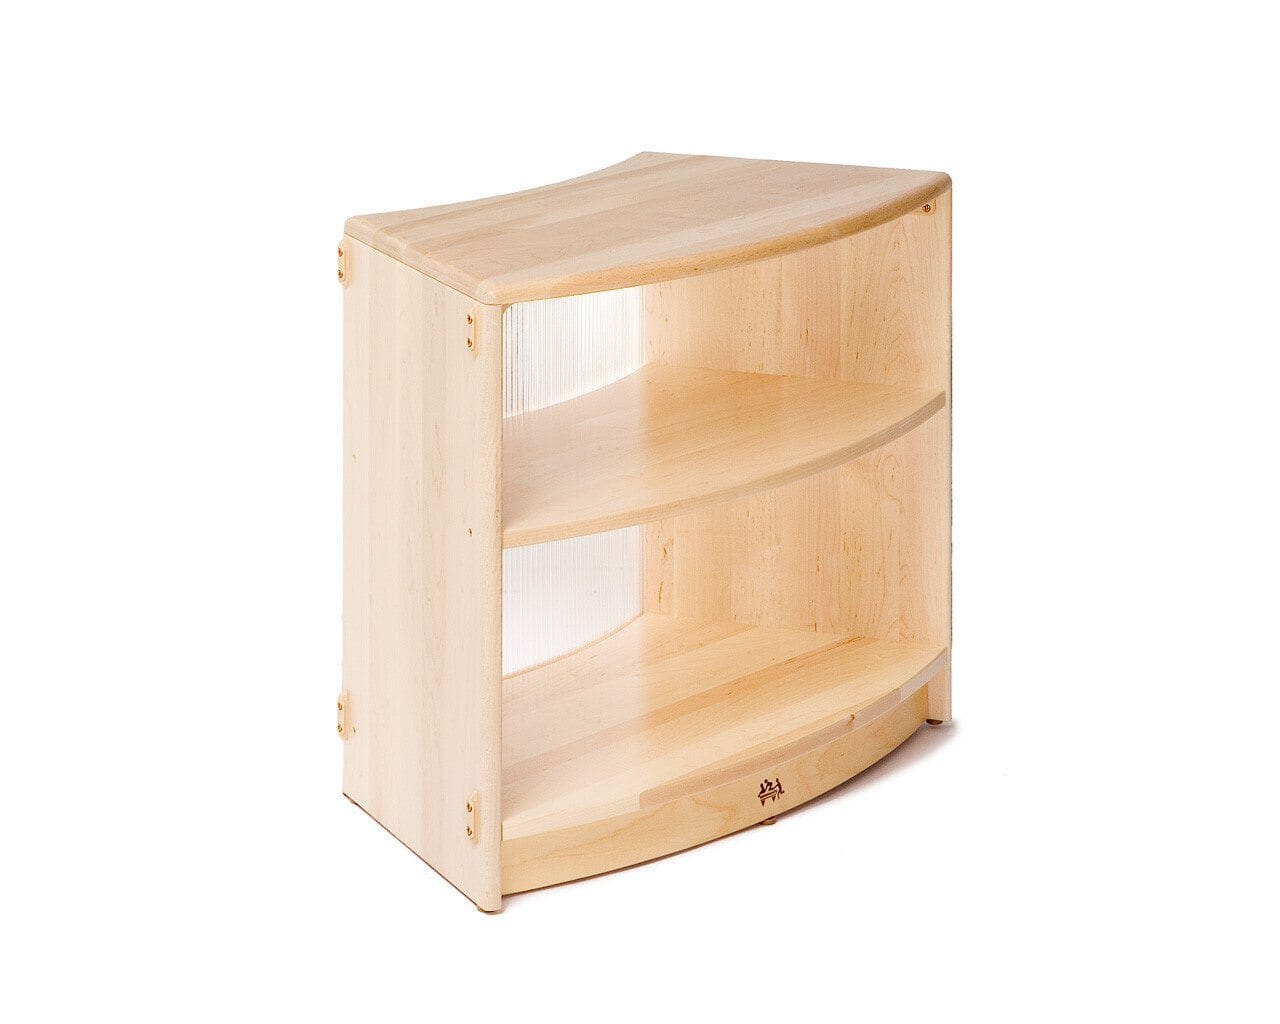 24"H Sweep Shelf with Translucent Backing by Community Playthings - louisekool